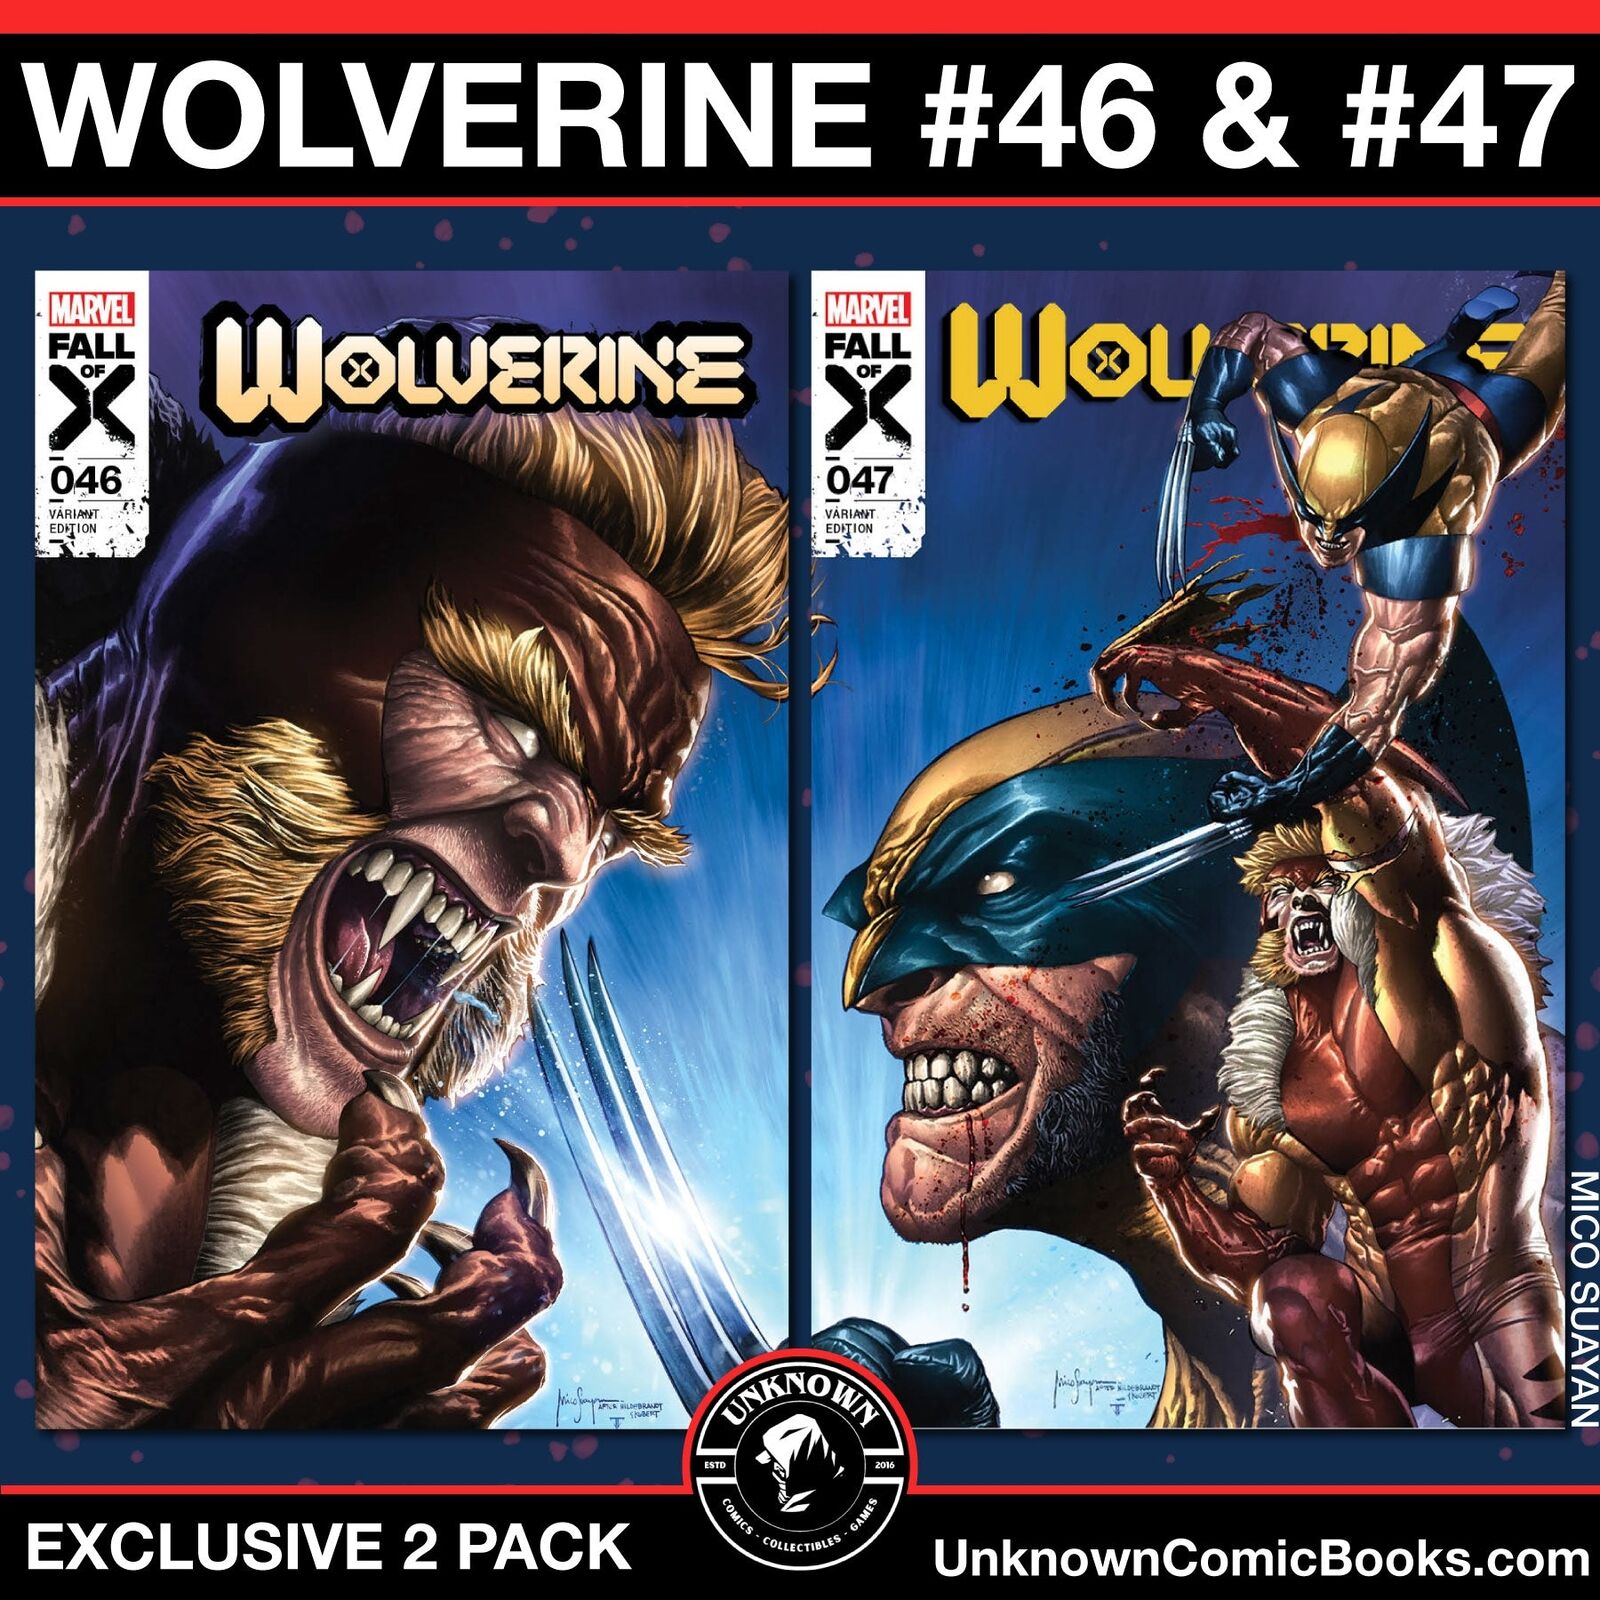 [2 PACK] WOLVERINE #46 & #47 UNKNOWN COMICS MICO SUAYAN EXCLUSIVE VAR (04/10/202